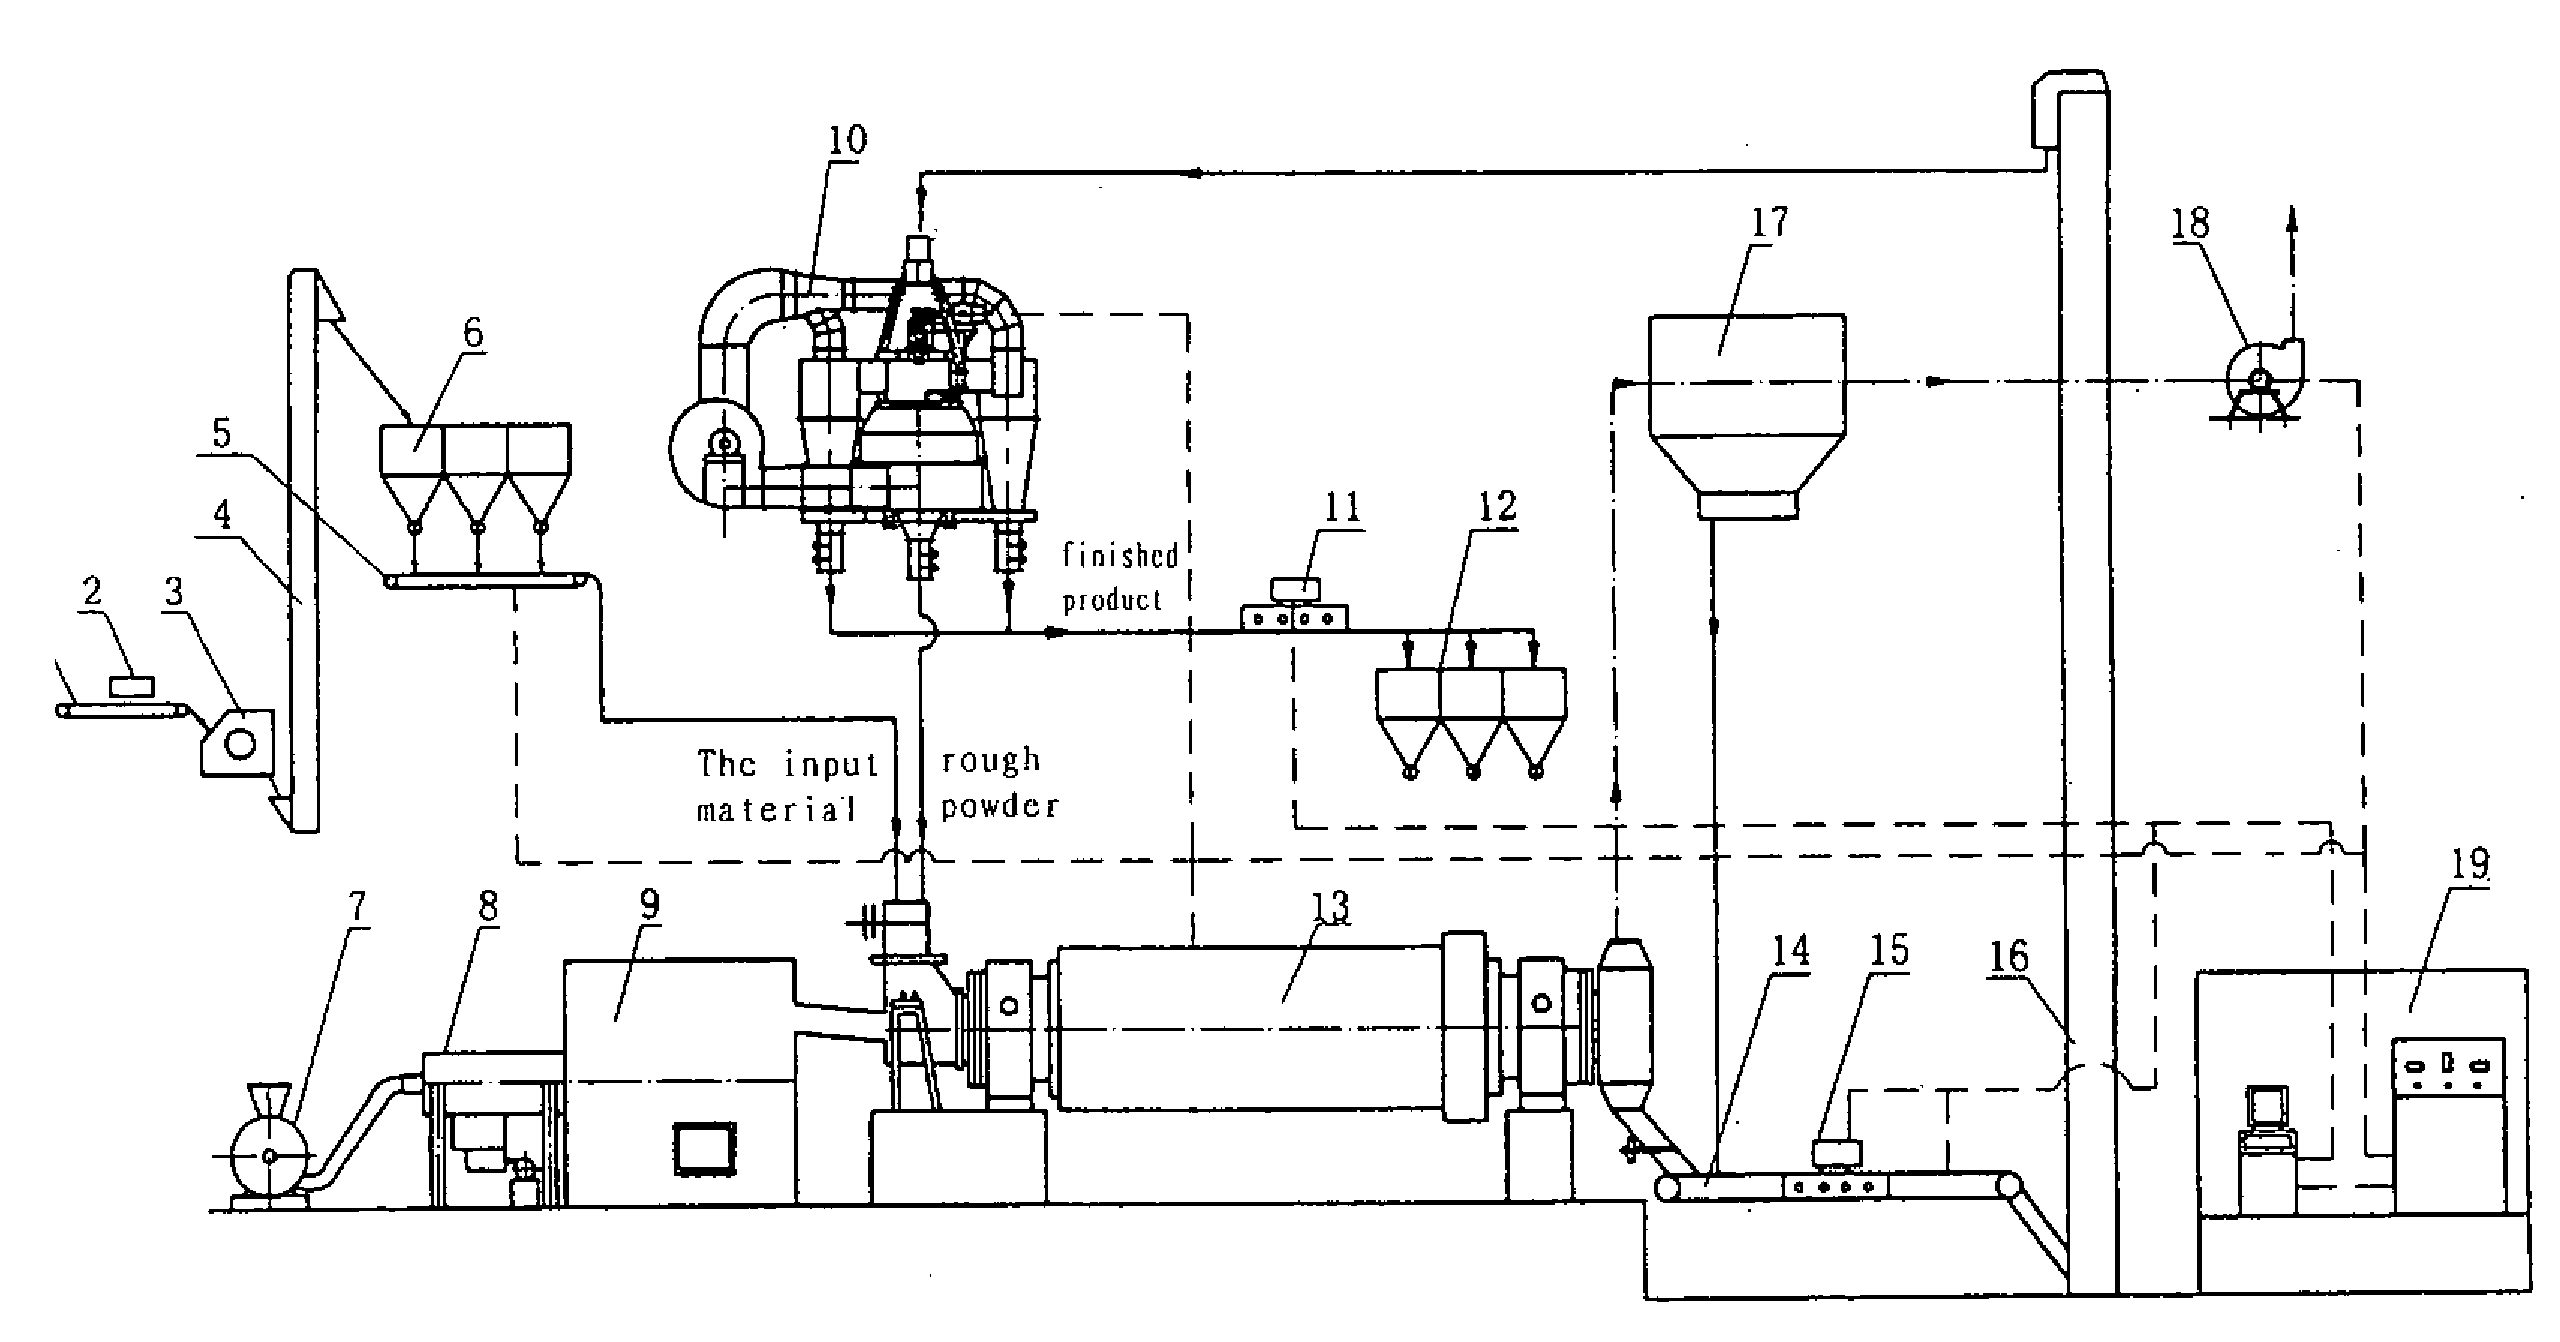 Control method for superfine powder grinding industrial waste slag in an energy-saving and environmental-friendly type of closed cycle with high yield and the apparatus for the same